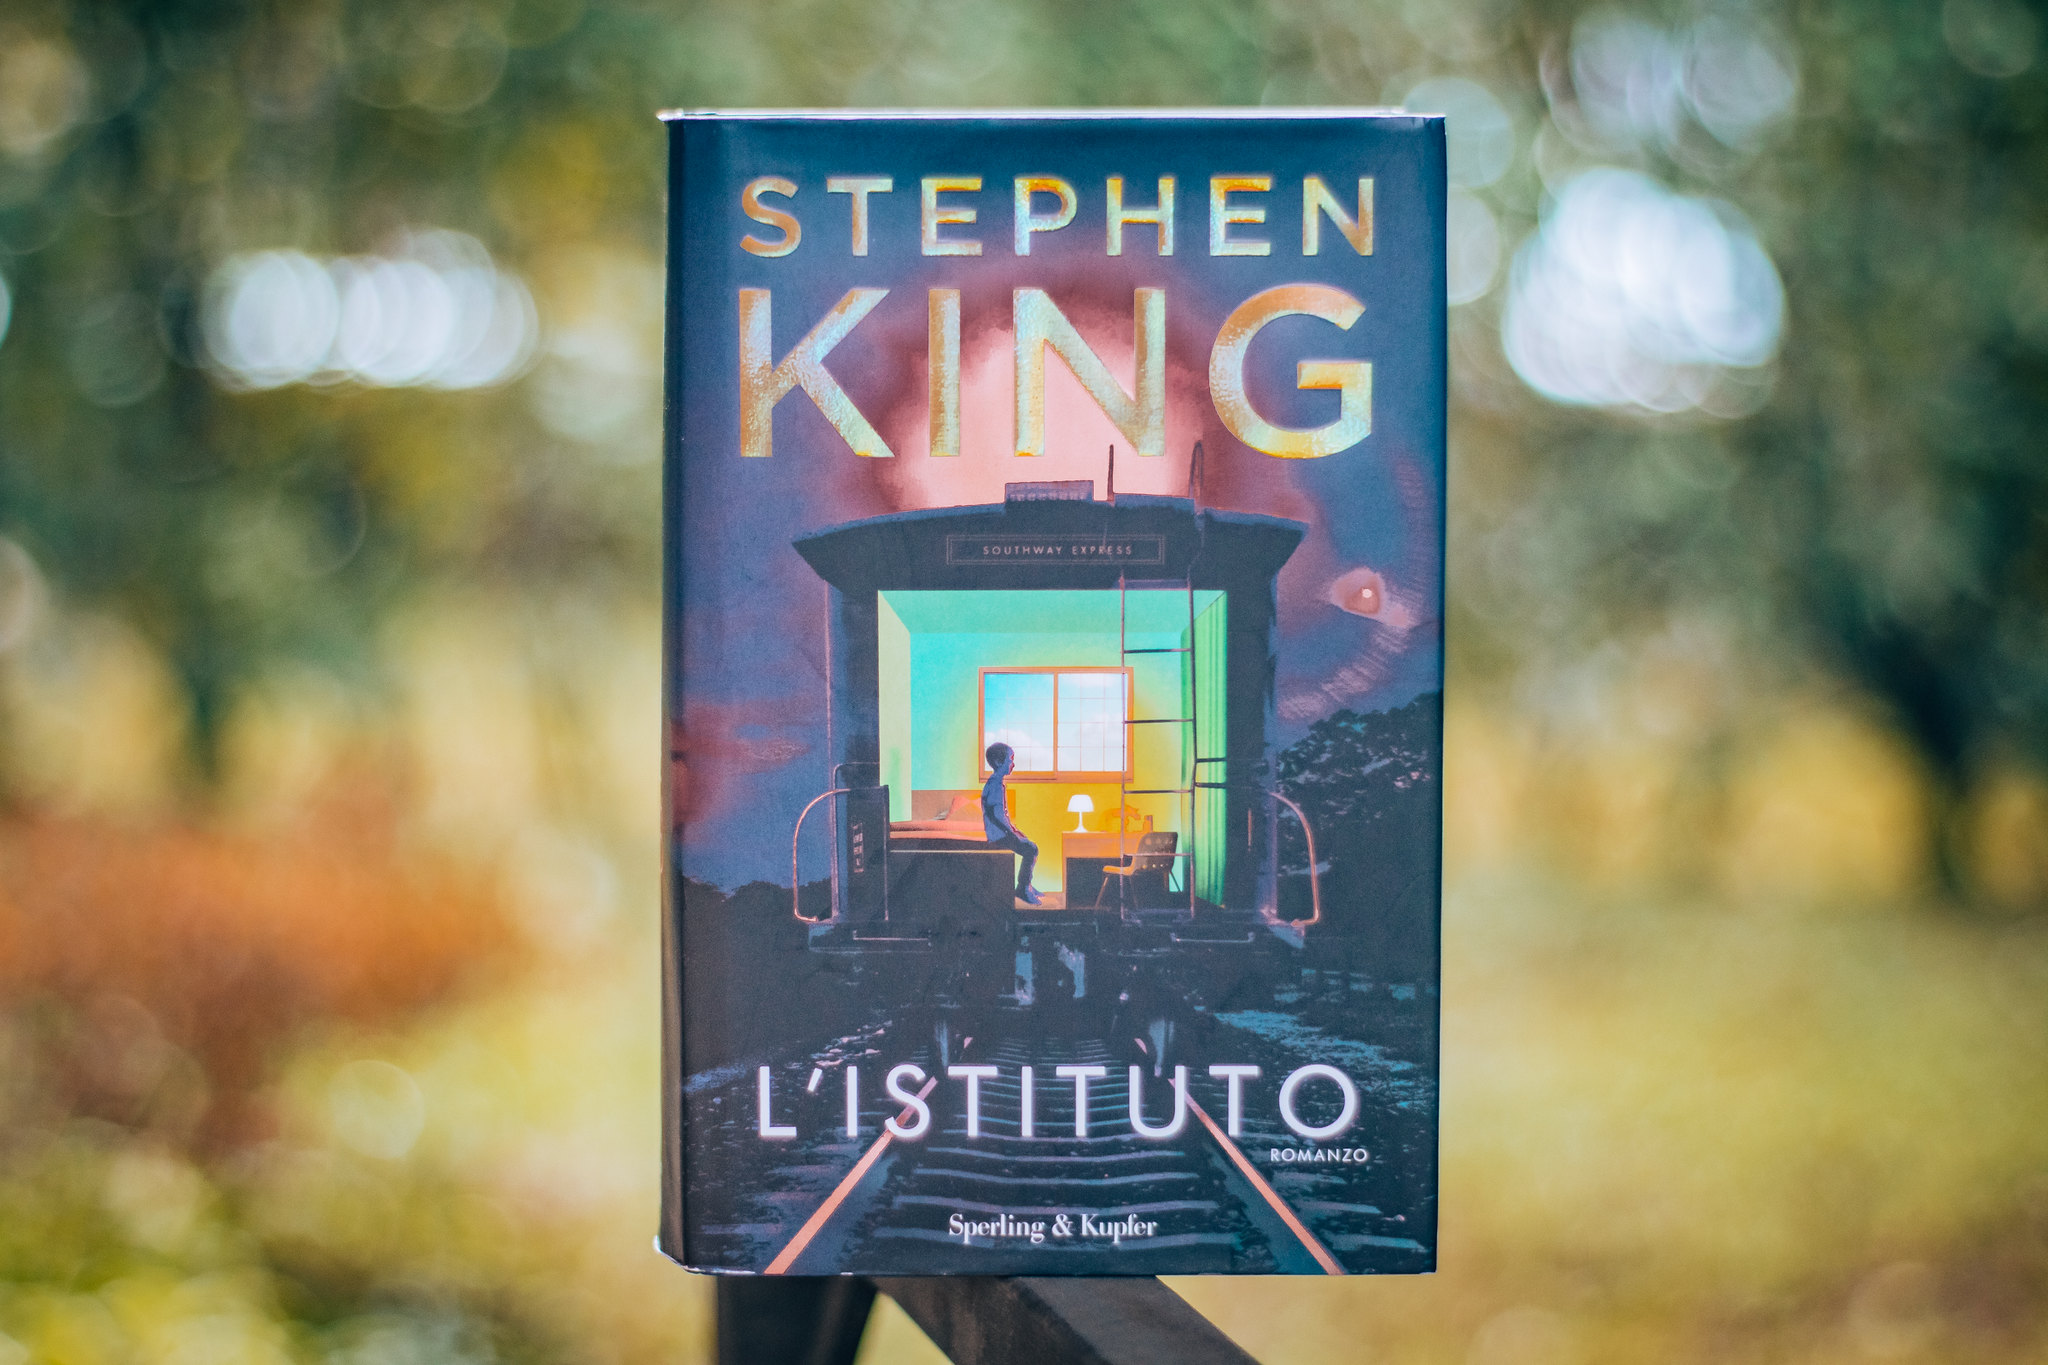 L’istituto, Stephen King